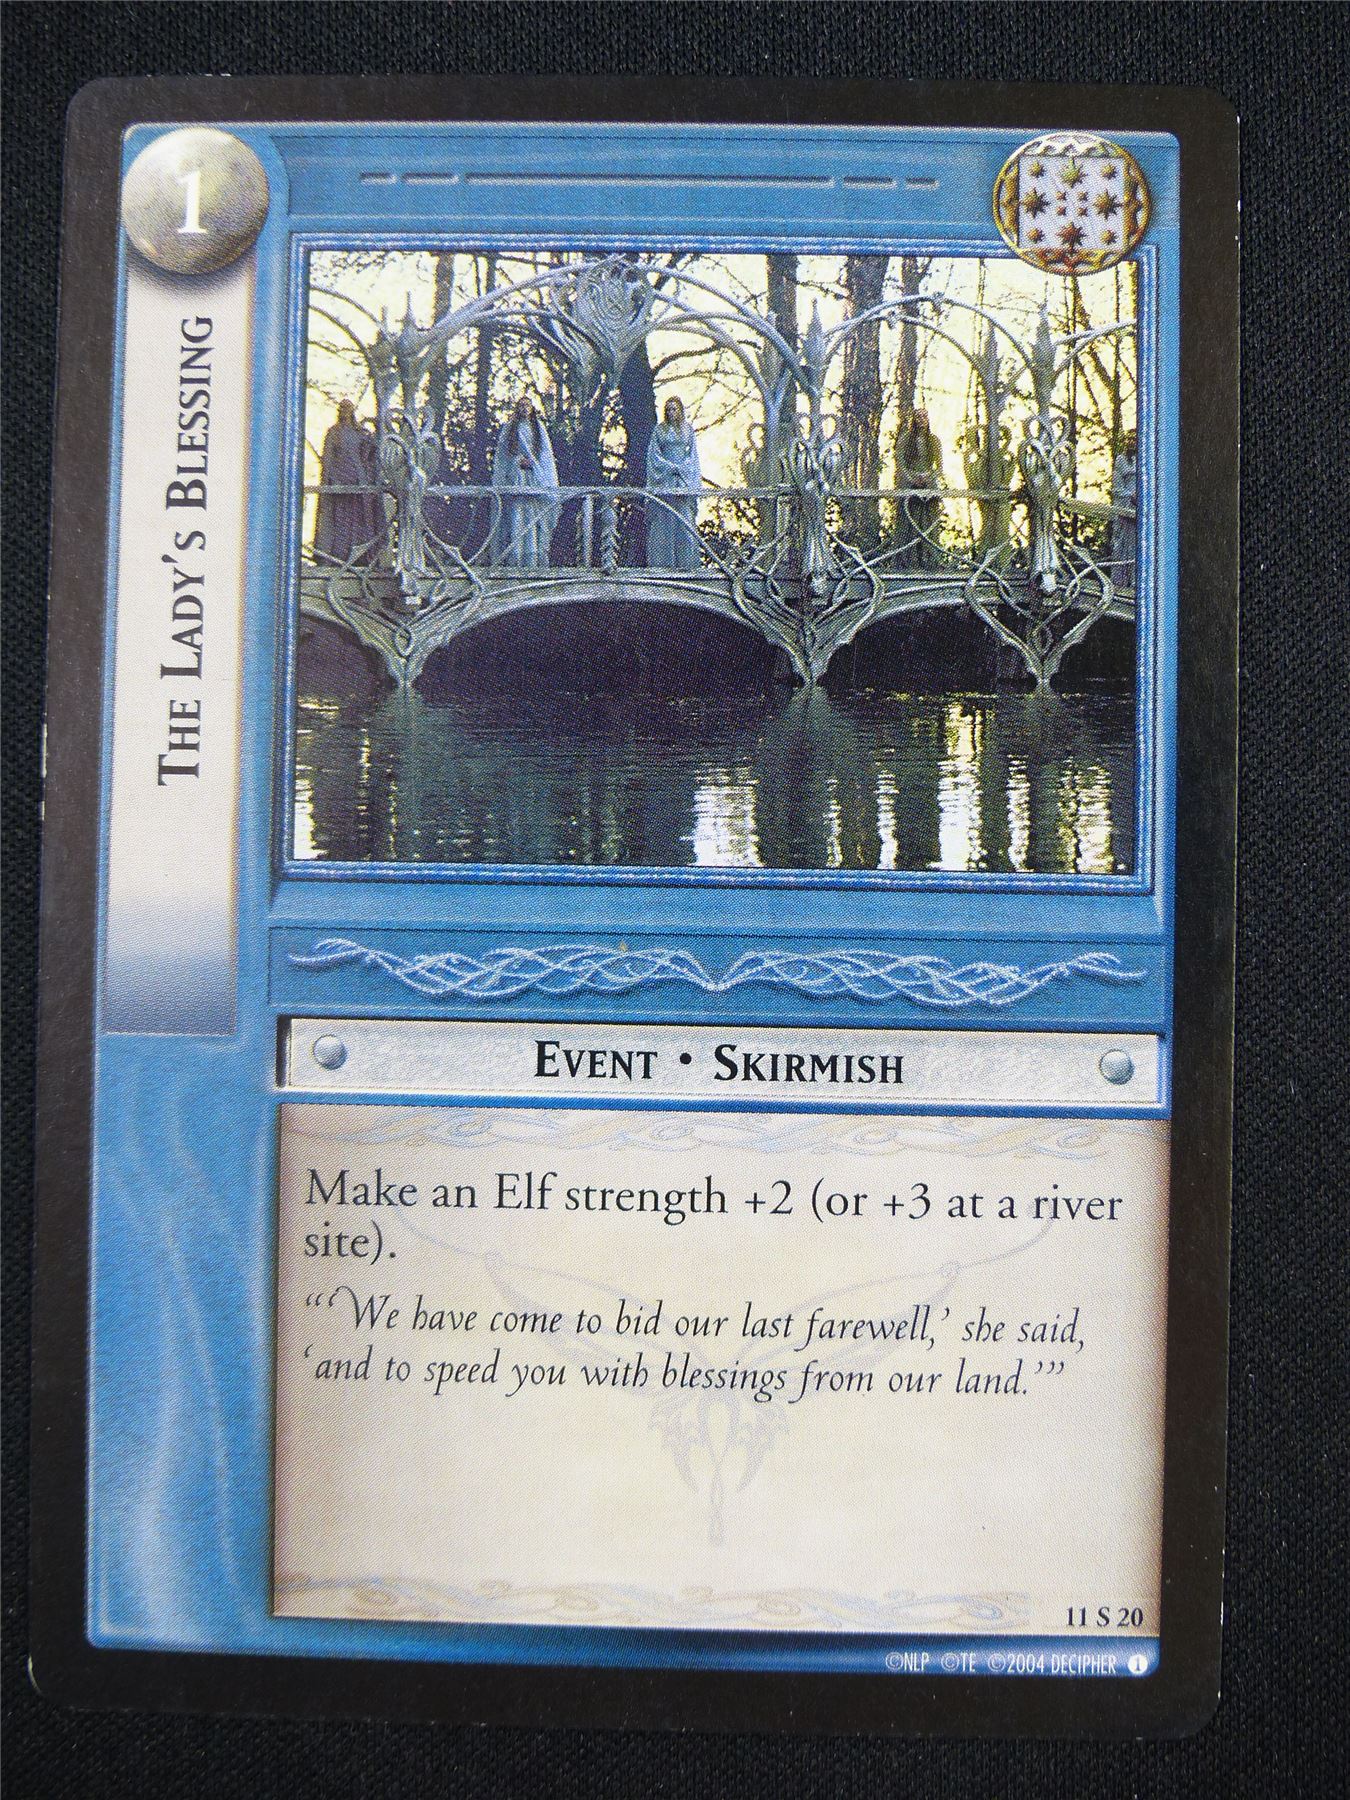 The Lady's Blessing 11 S 20 - LotR Card #18B